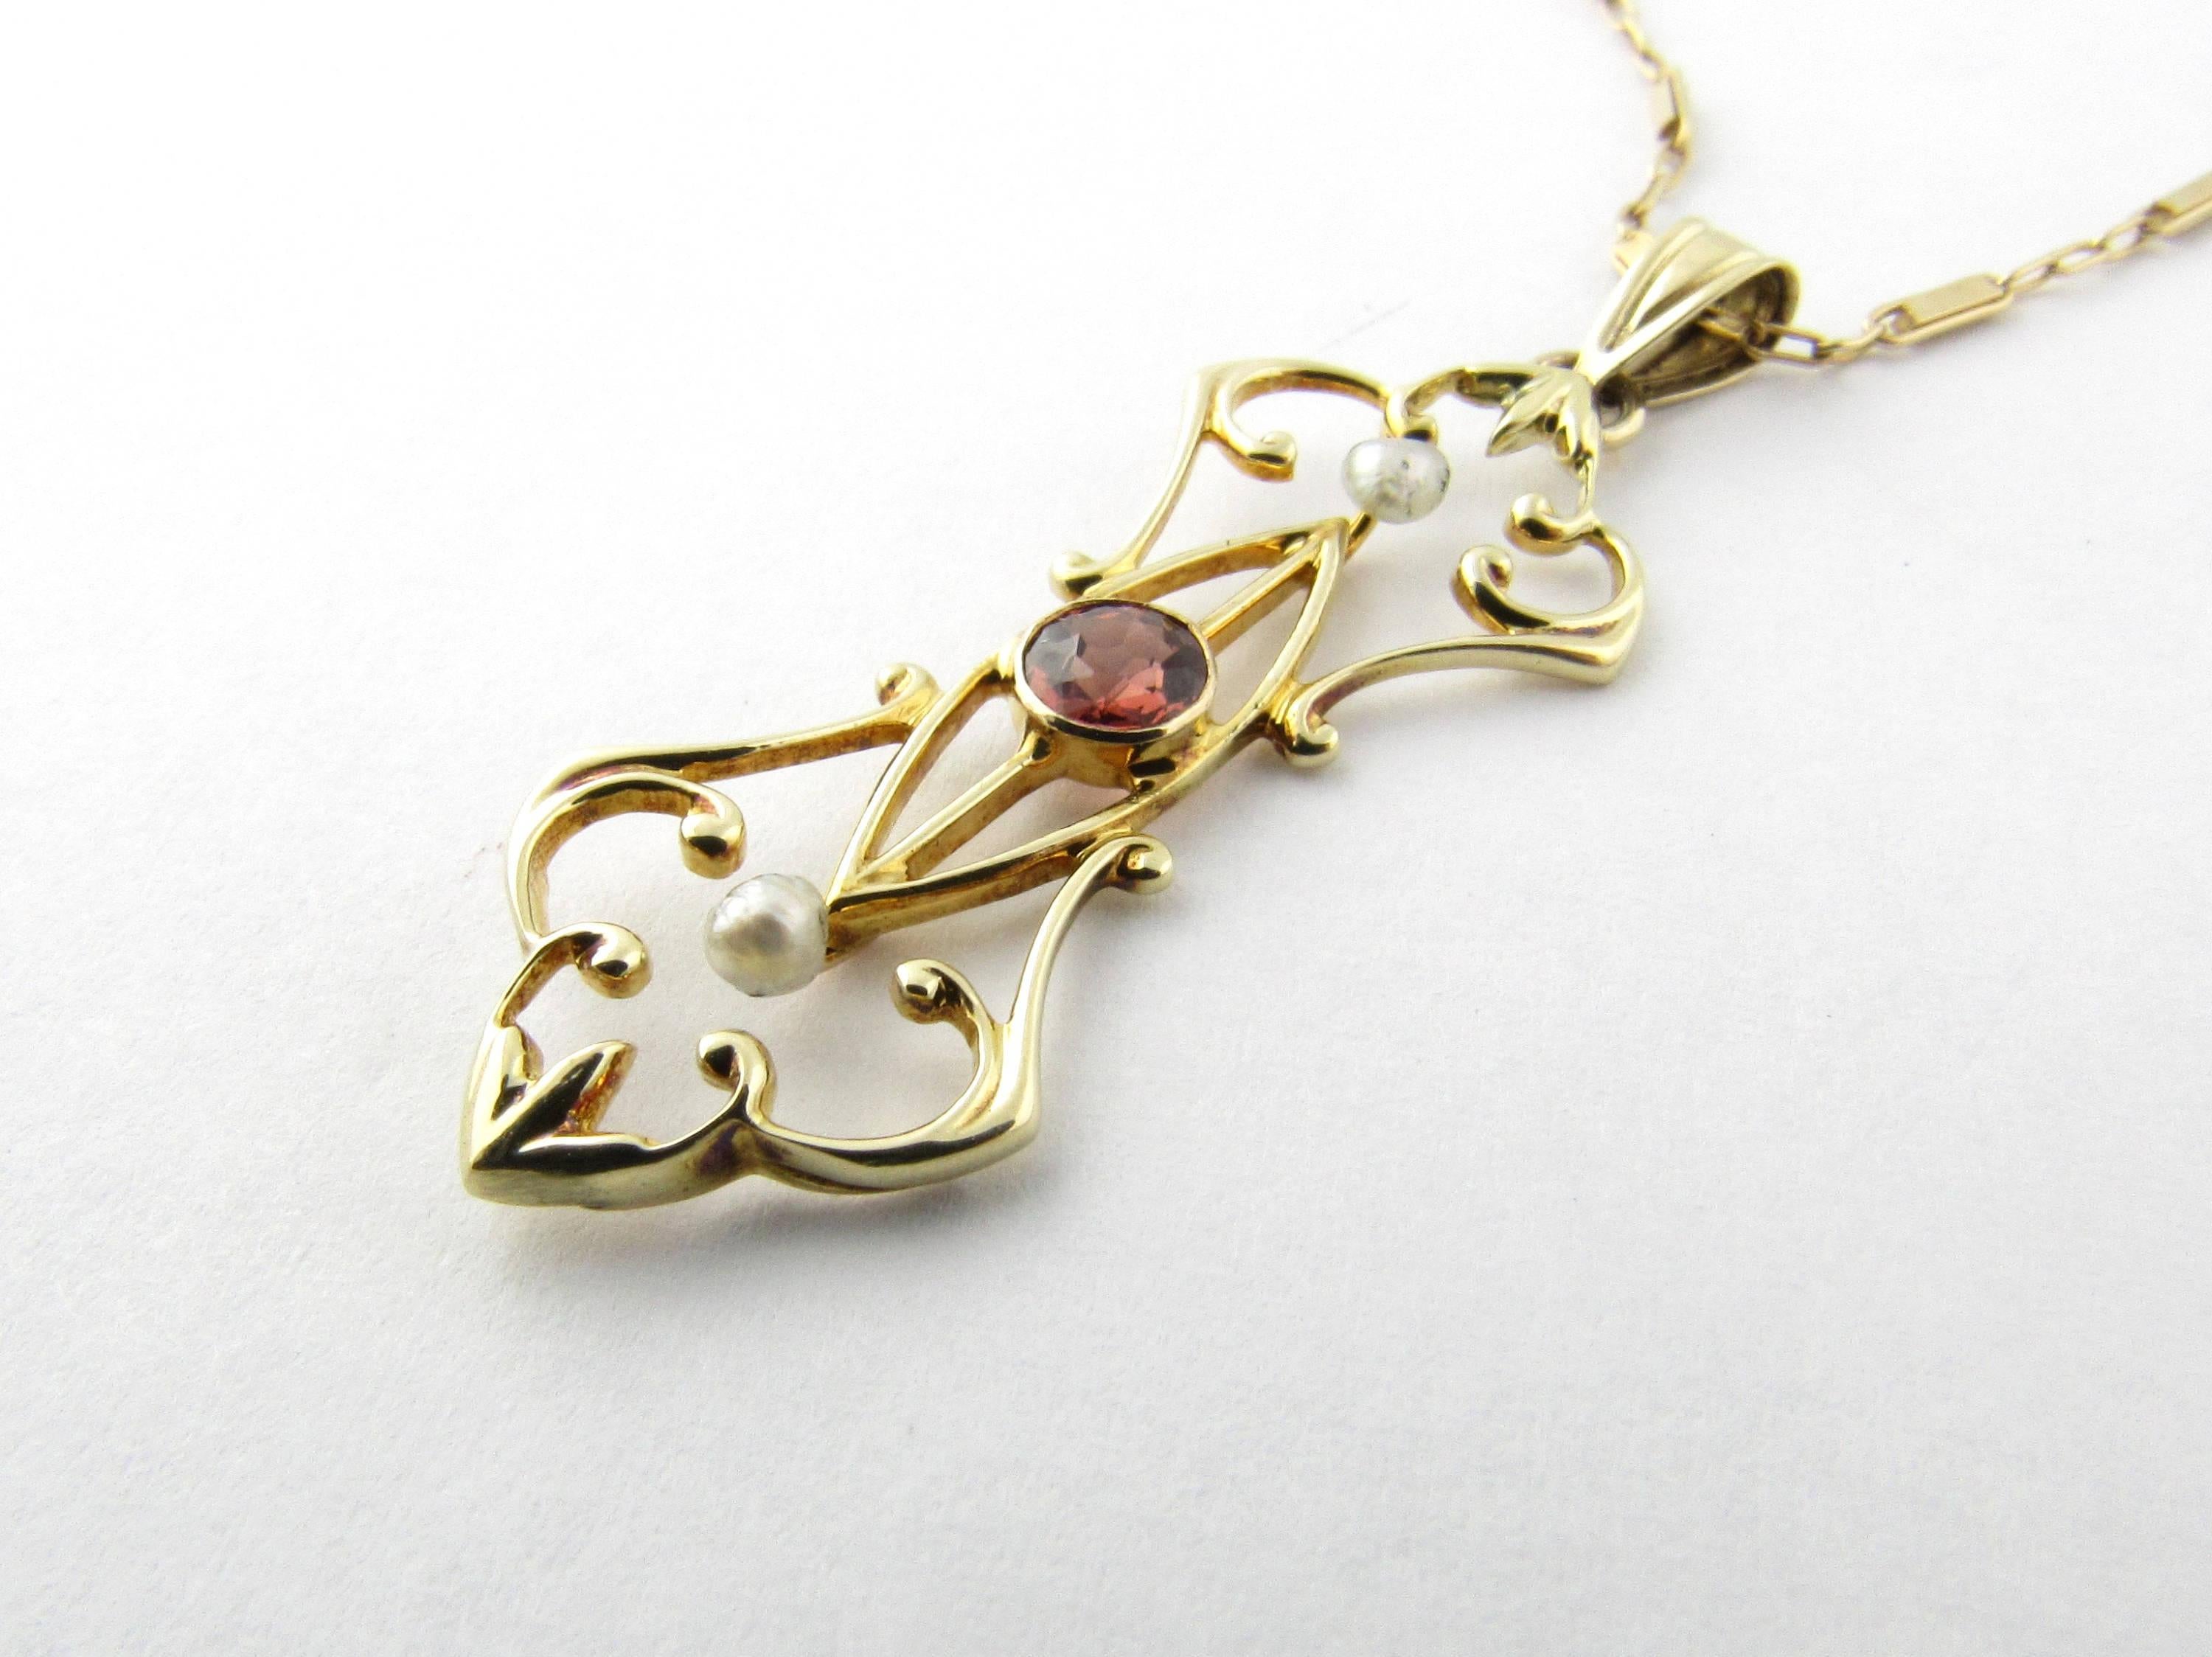 Vintage 14 Karat Yellow Gold and Rhodolite Garnet Pendant-

This unique custom made pendant was upscaled from a vintage pin and features a rhodolite garnet (4 mm) accented with two seed pearls and set in ornate 14K gold on a lovely 18 inch 14K gold